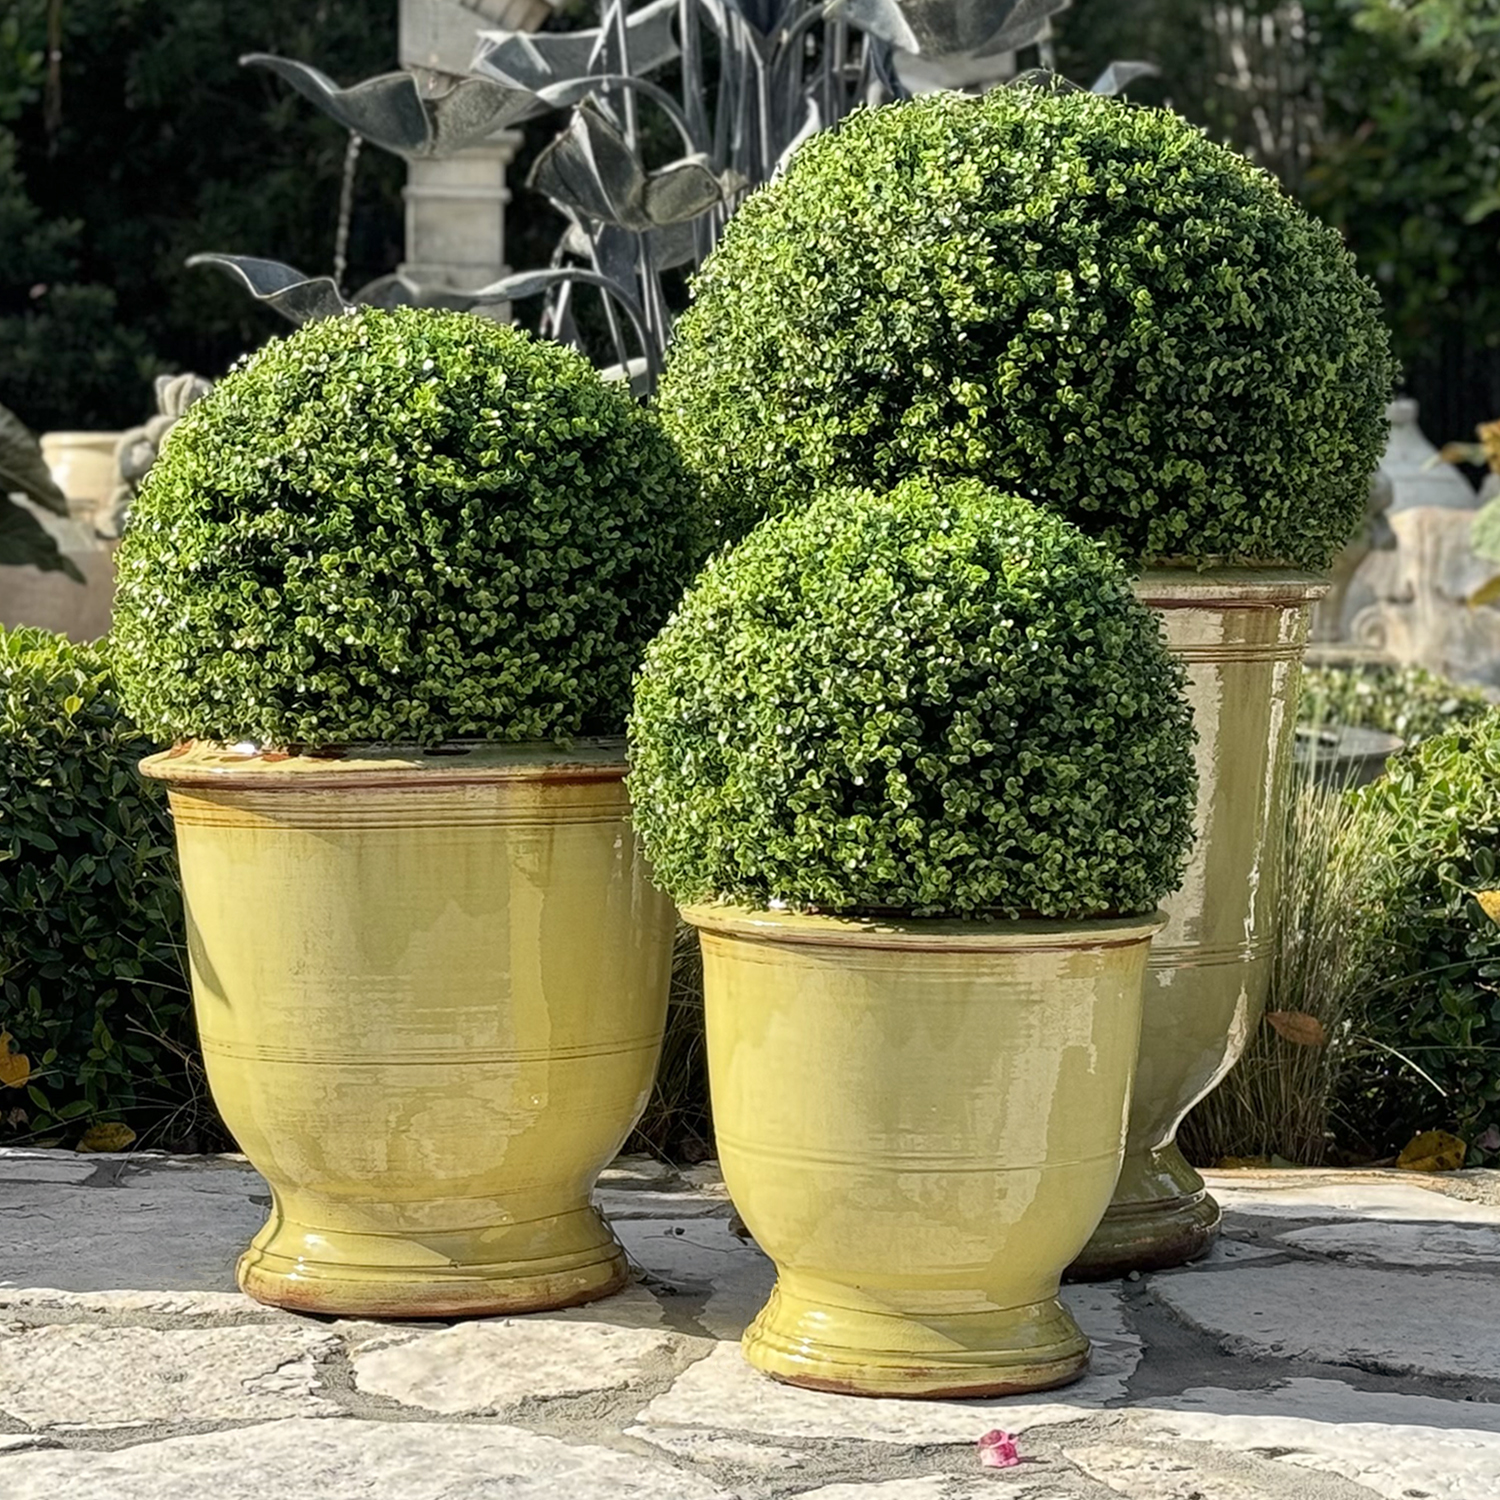 The Anduze garden planter has a fully glazed finish. This light yelllow terra cotta clay urn is hand made in Provence, France.